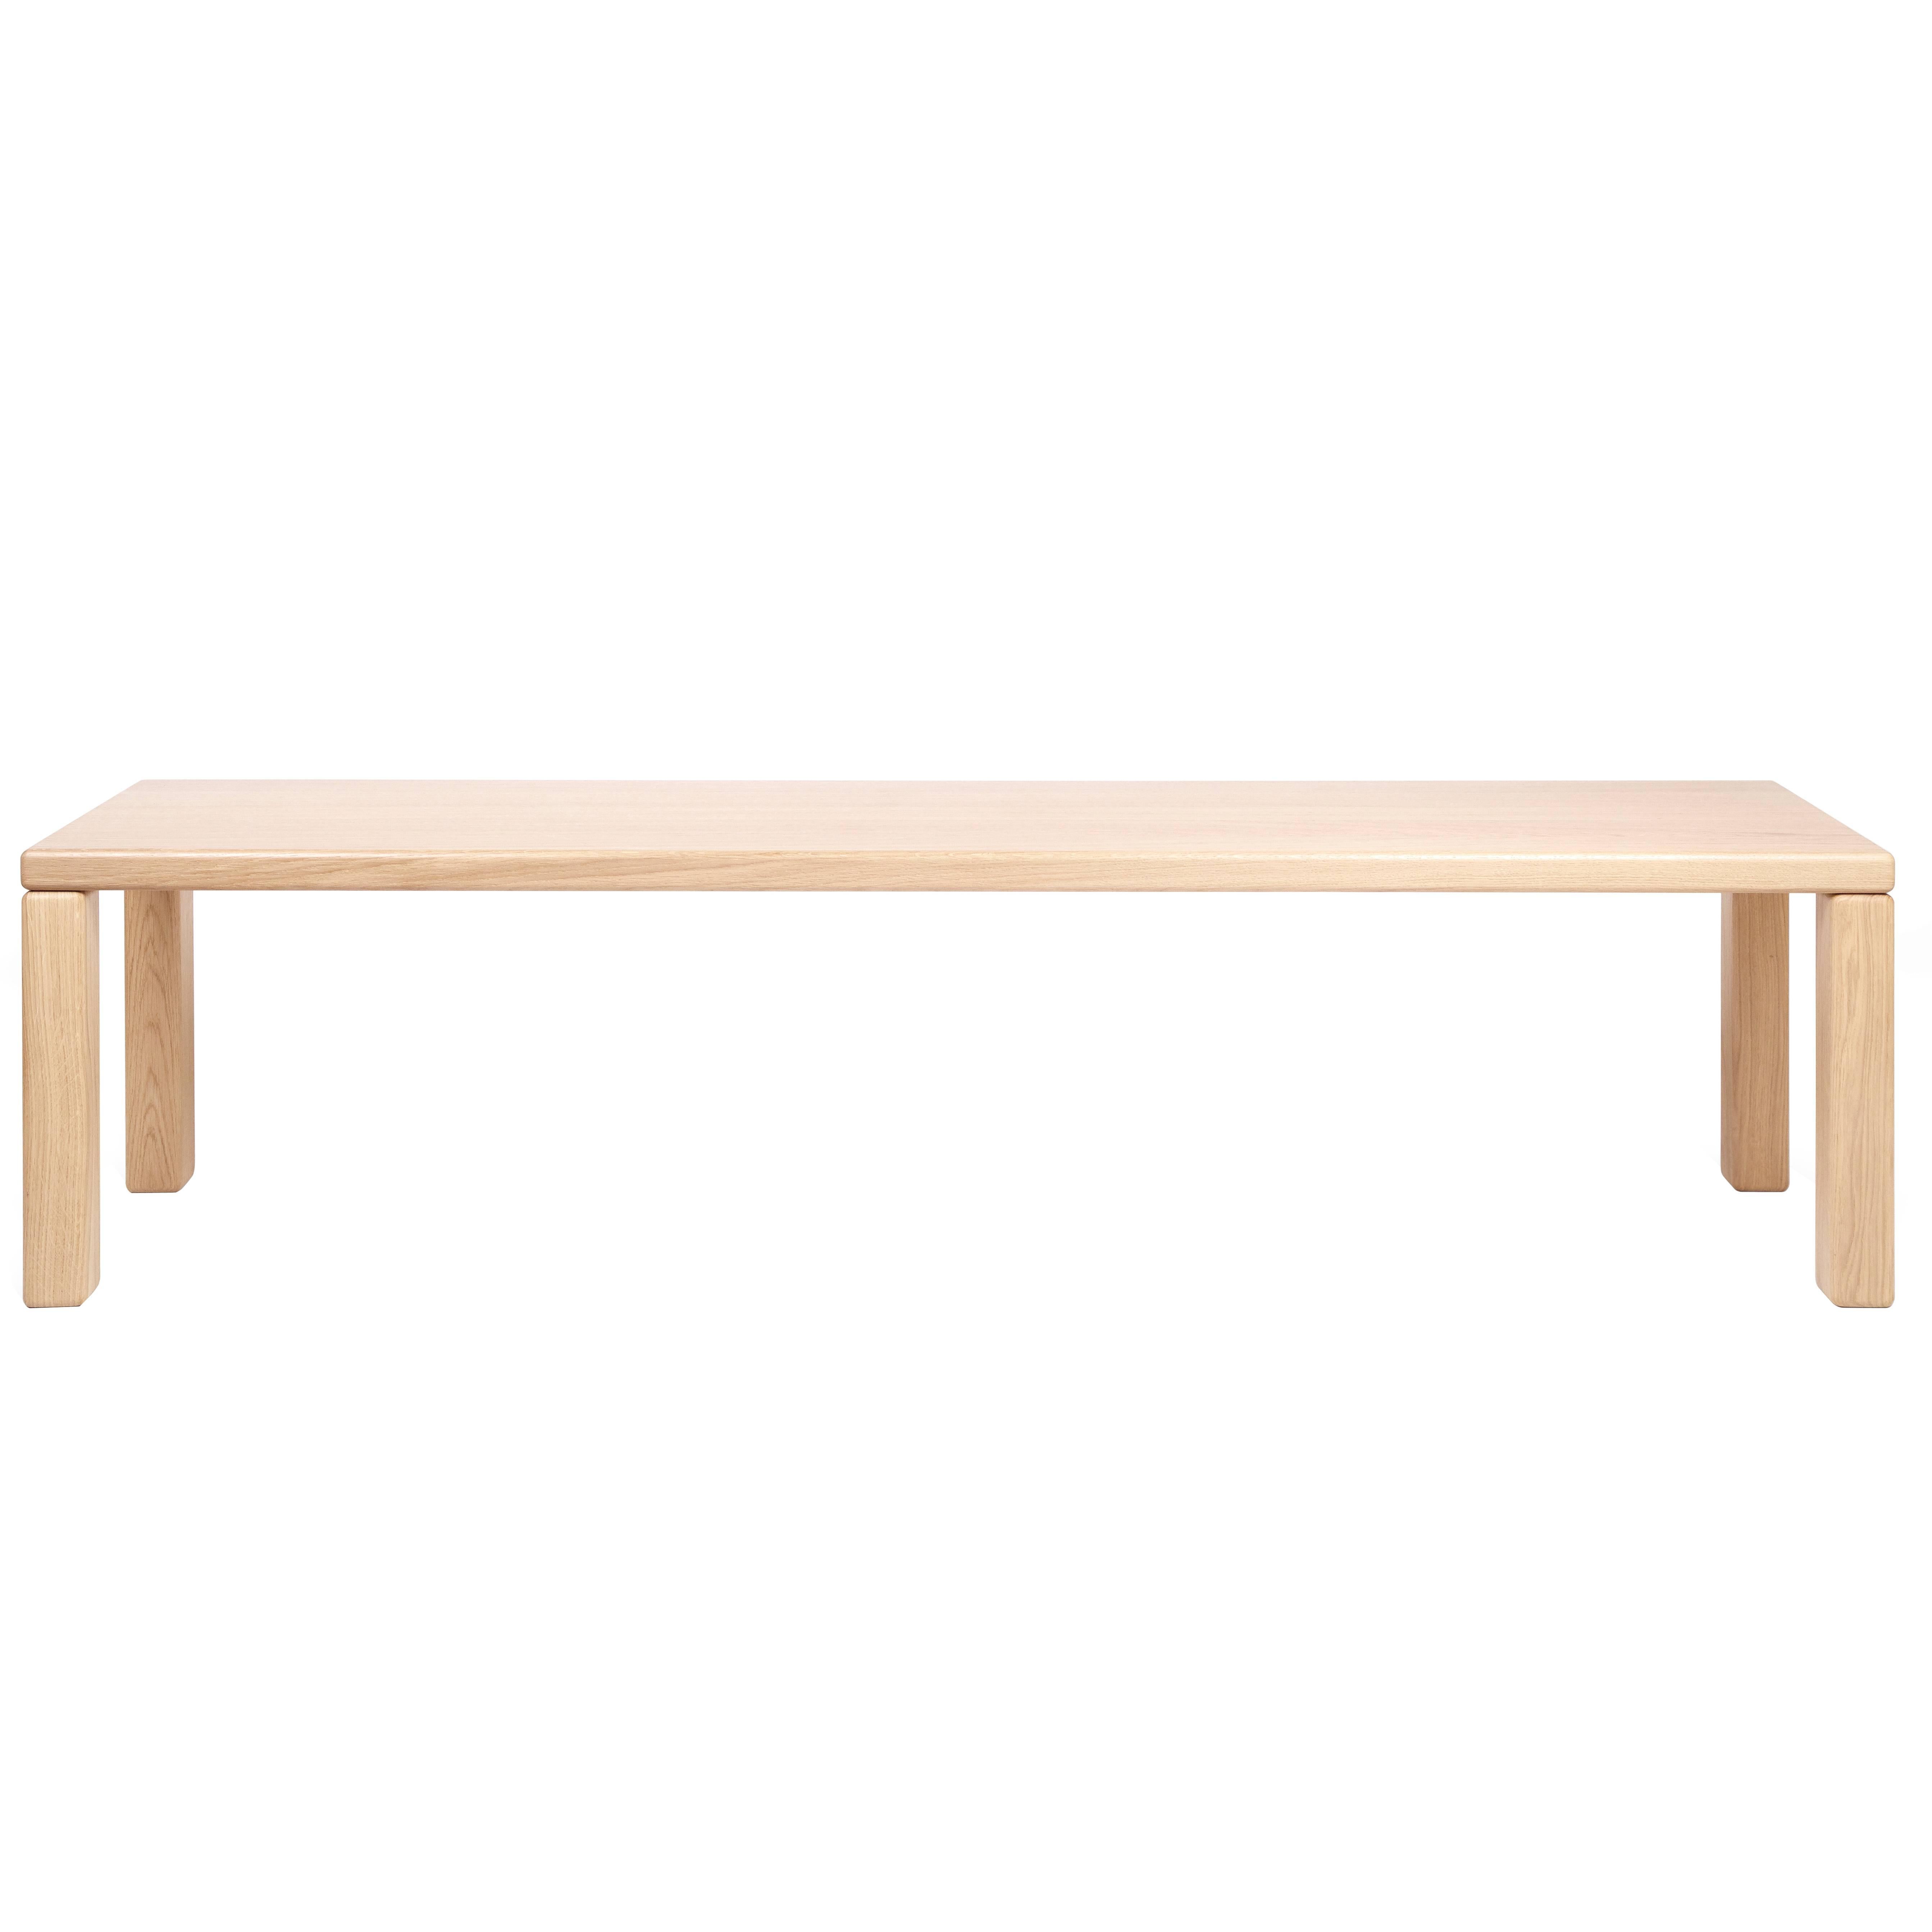 Alias Oak Element Bench by Terrence Woodgate, Belgium For Sale